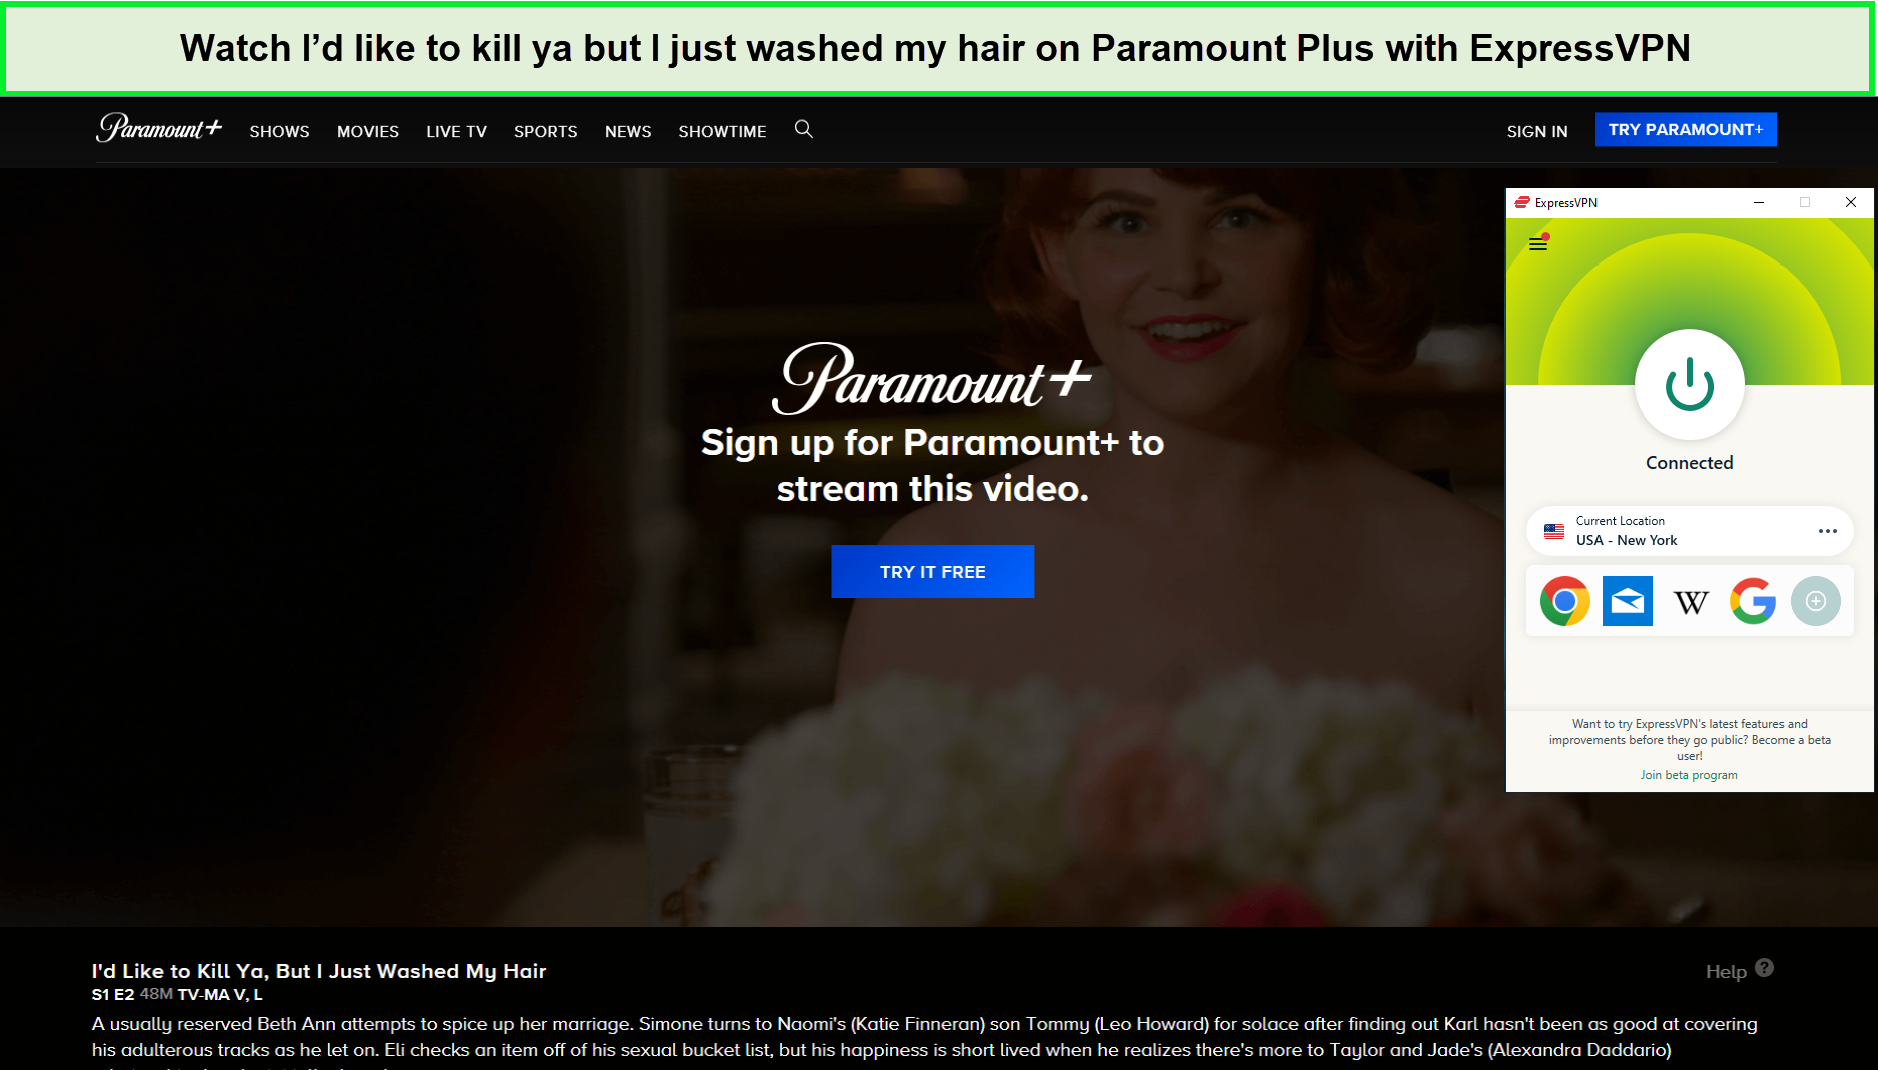 Watch-Id-like-to-kill-ya-but-I-just-washed-my-hair-in-Japanon-Paramount-Plus-with-ExpressVPN